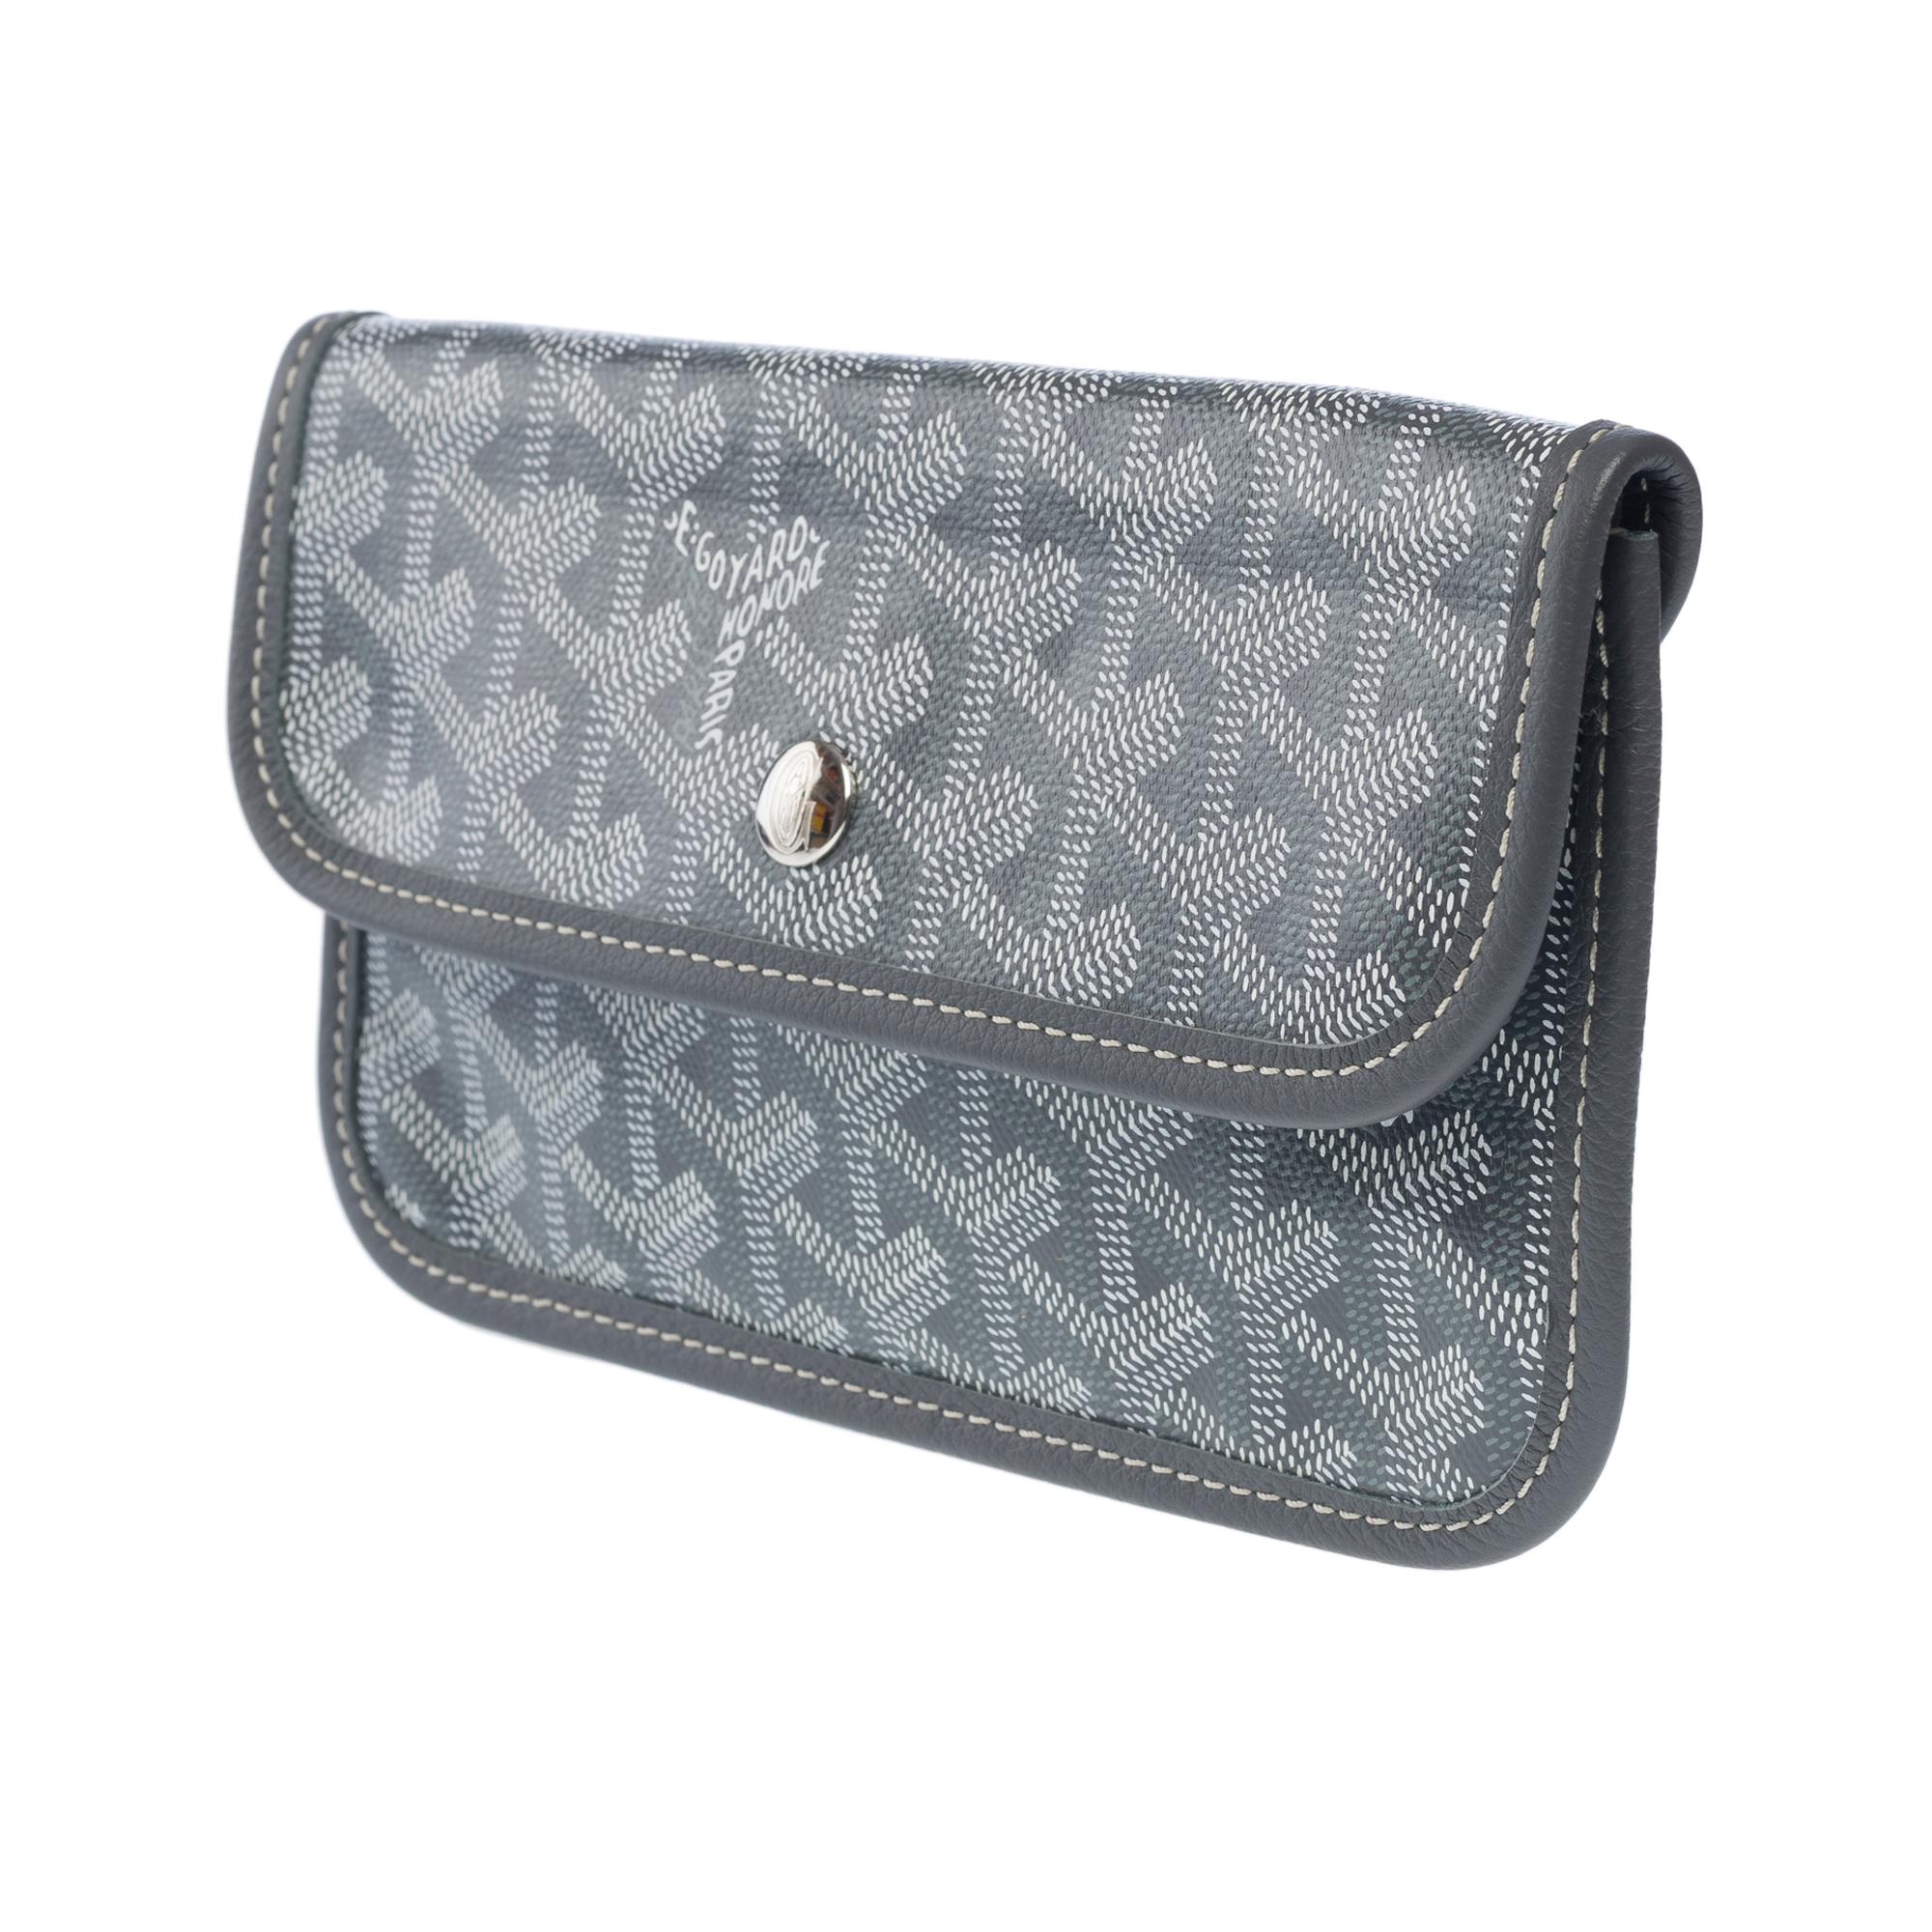 New Goyard Saint-Louis Pouch in grey and white canvas, SHW For Sale 1